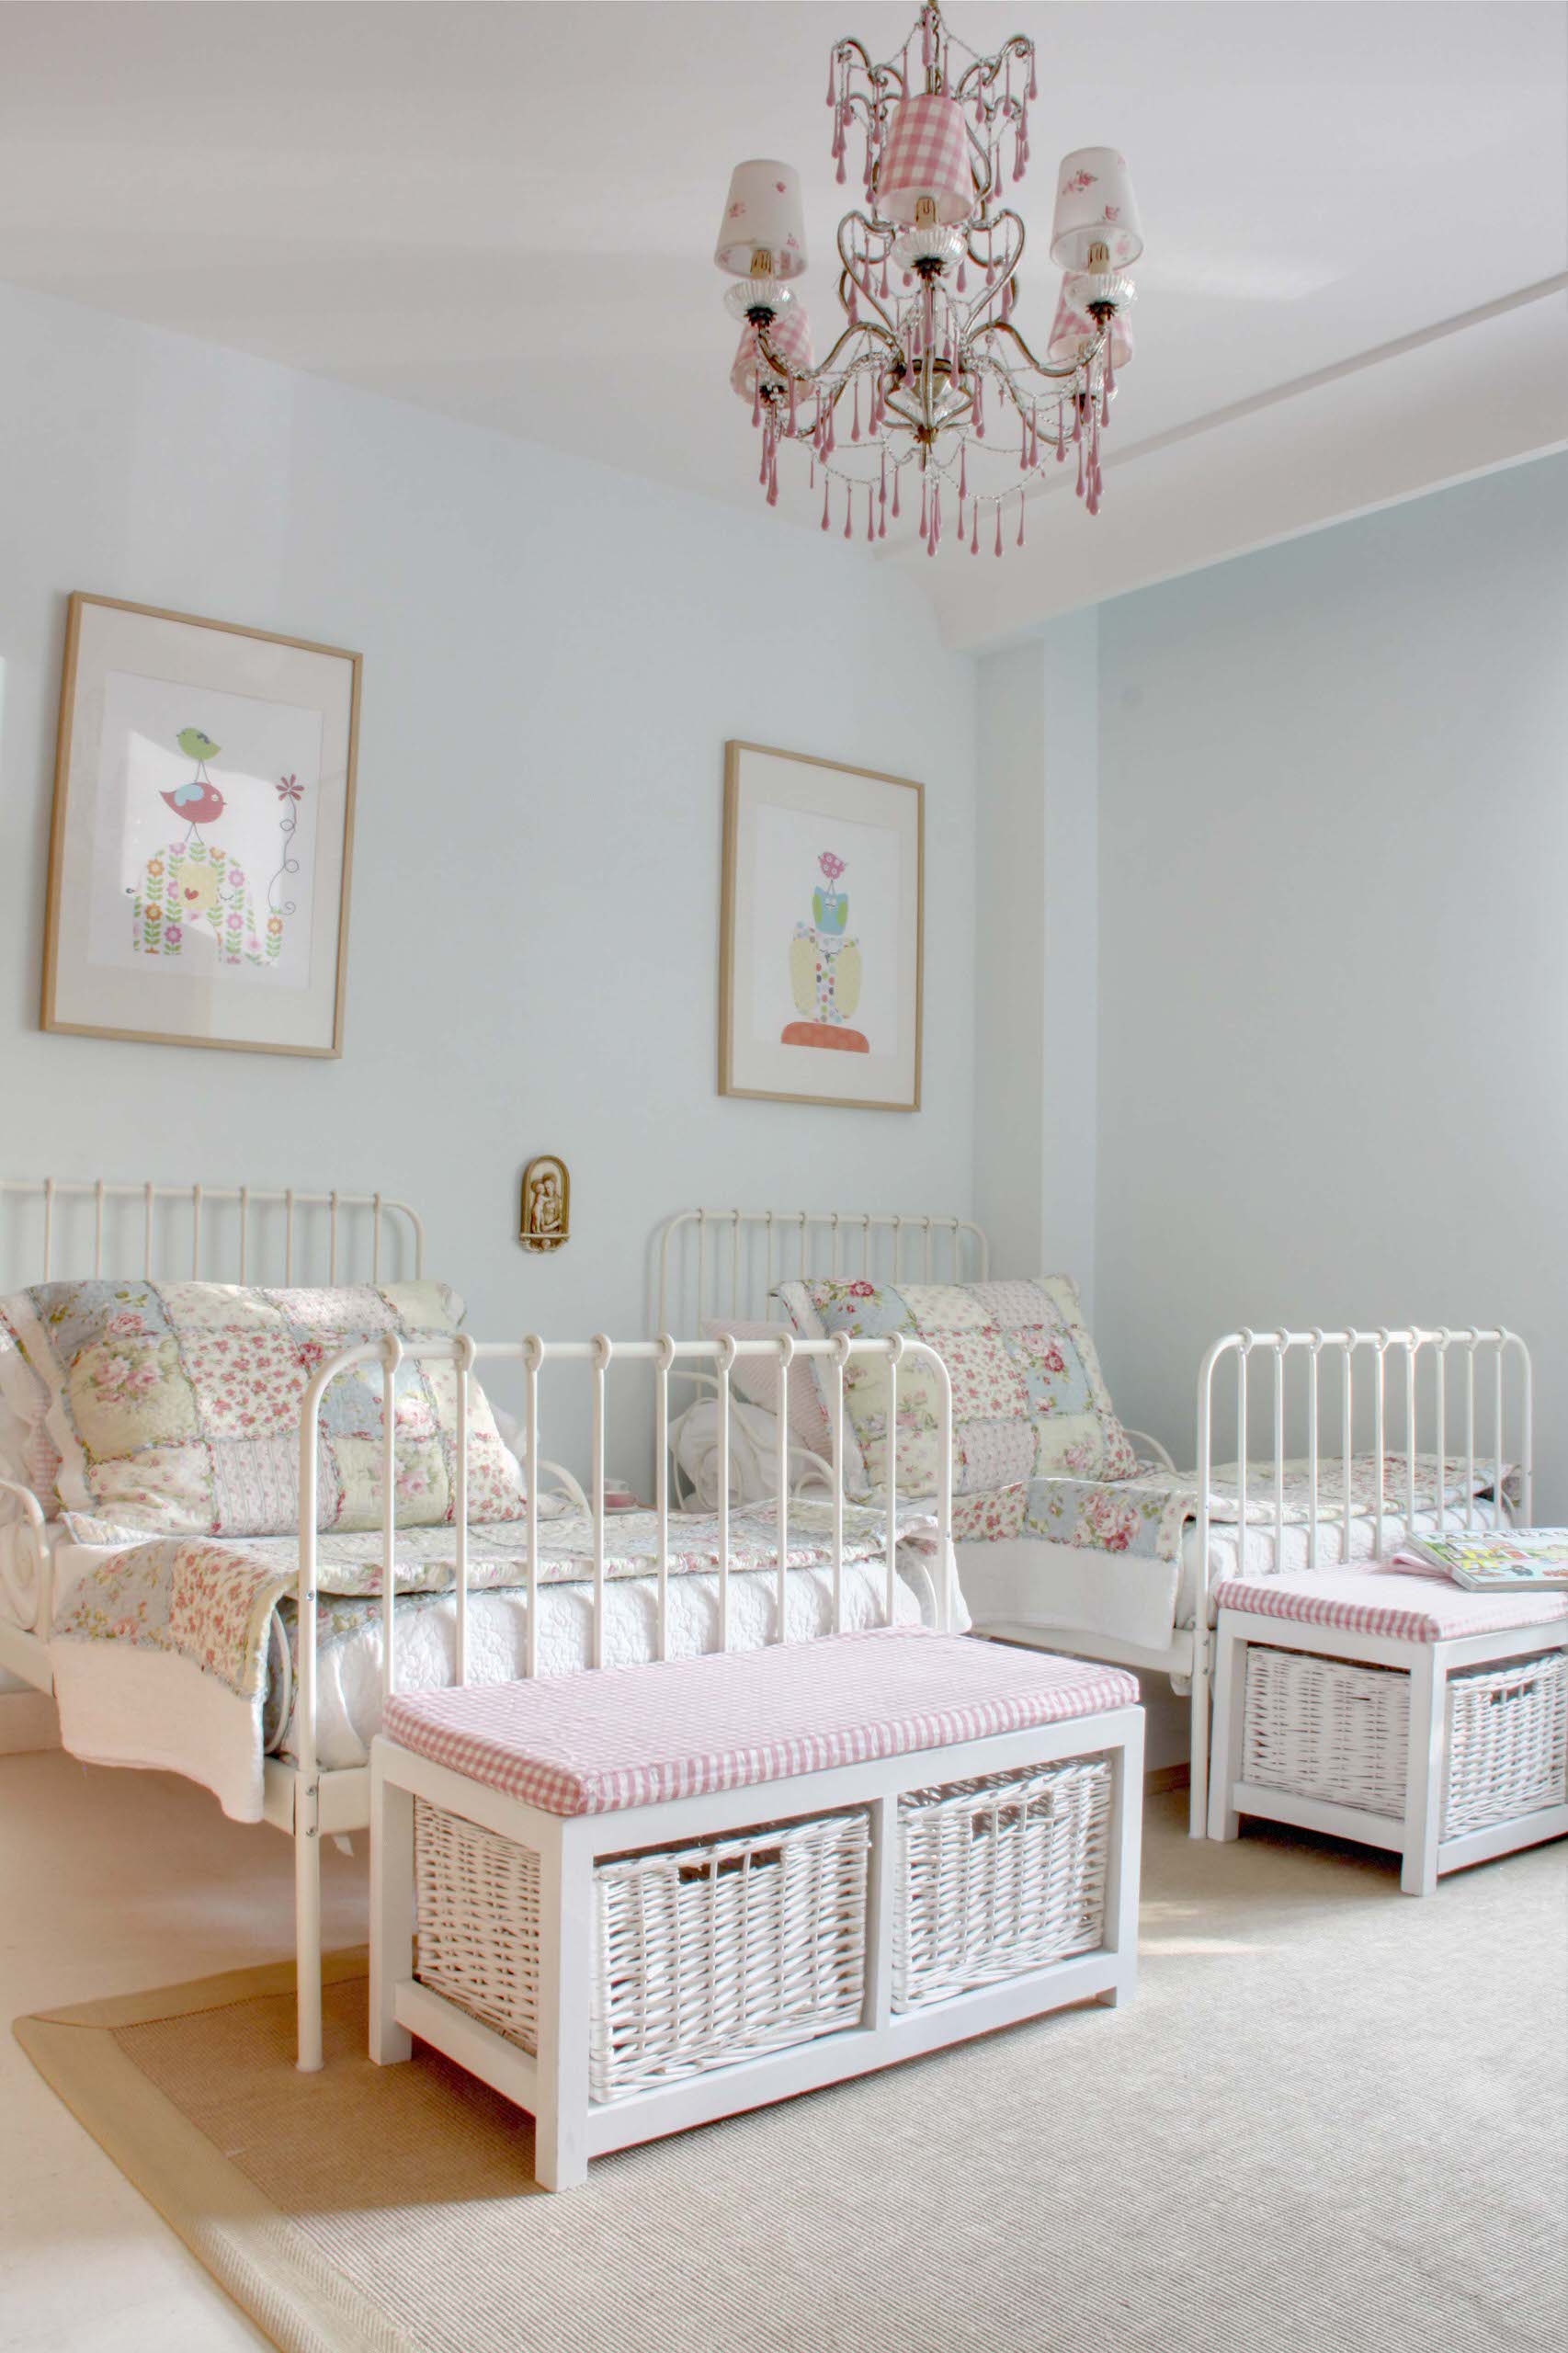 18 Magical Shabby-Chic Kids' Room Designs That Will Enchant You